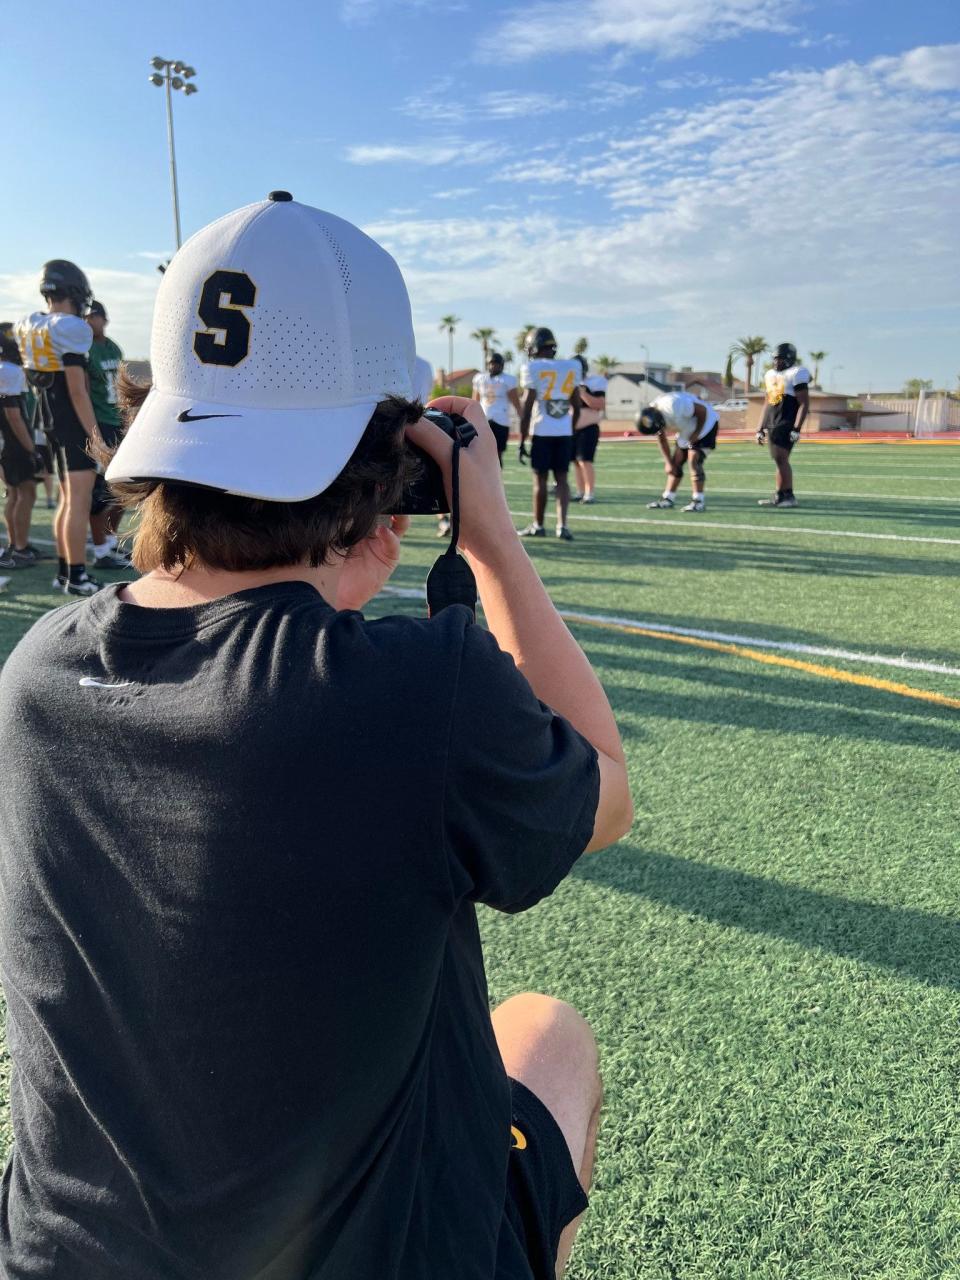 Cole Topham, in his role as creative director, takes photos at a recent football practice at Saguaro High School in Scottsdale, Ariz.